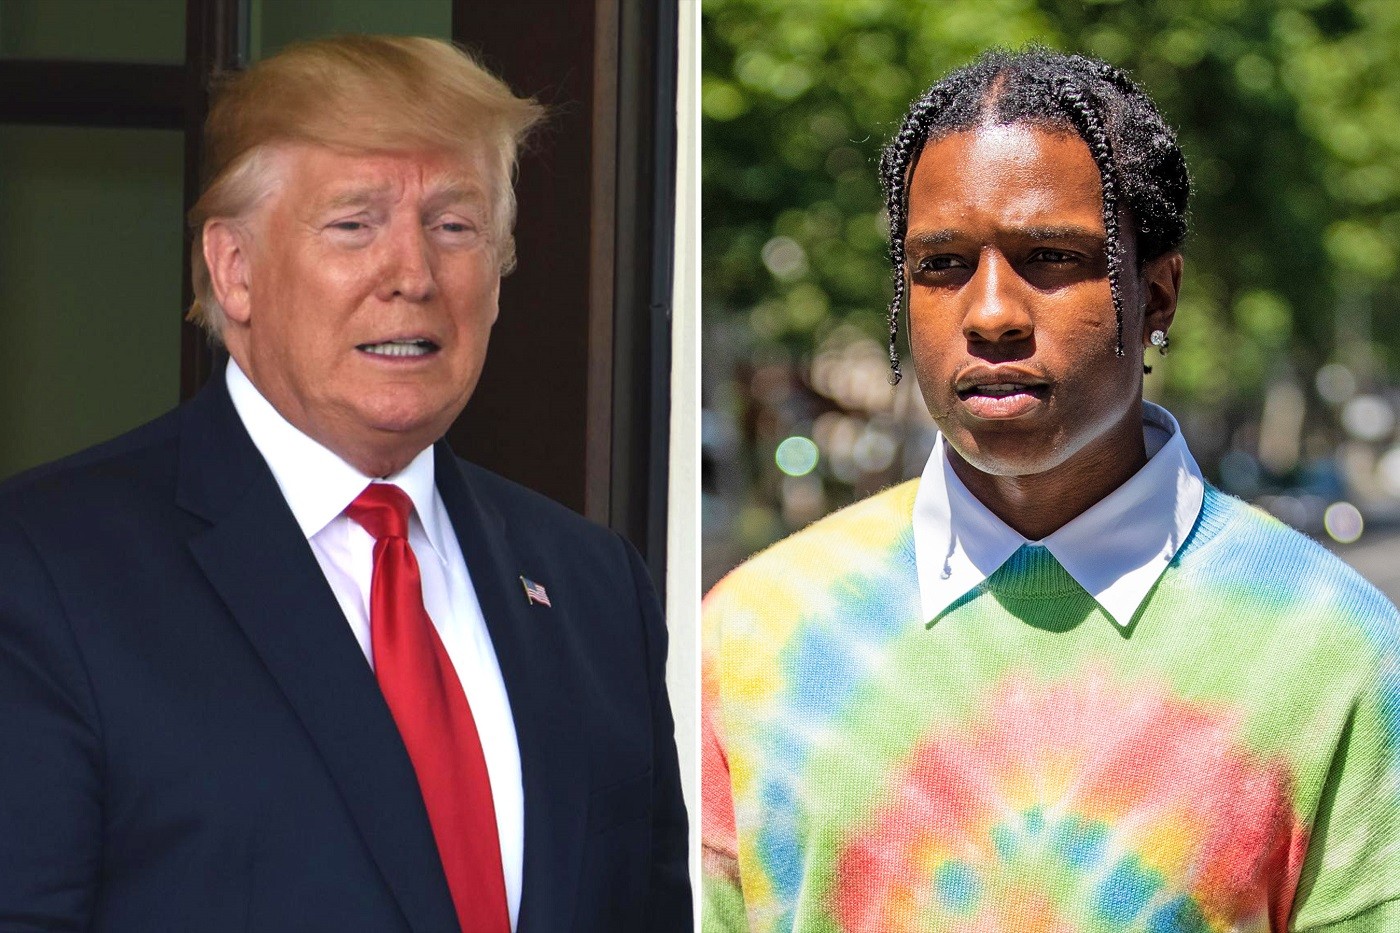 ASAP Rocky to Recieve Help From President Donald Trump